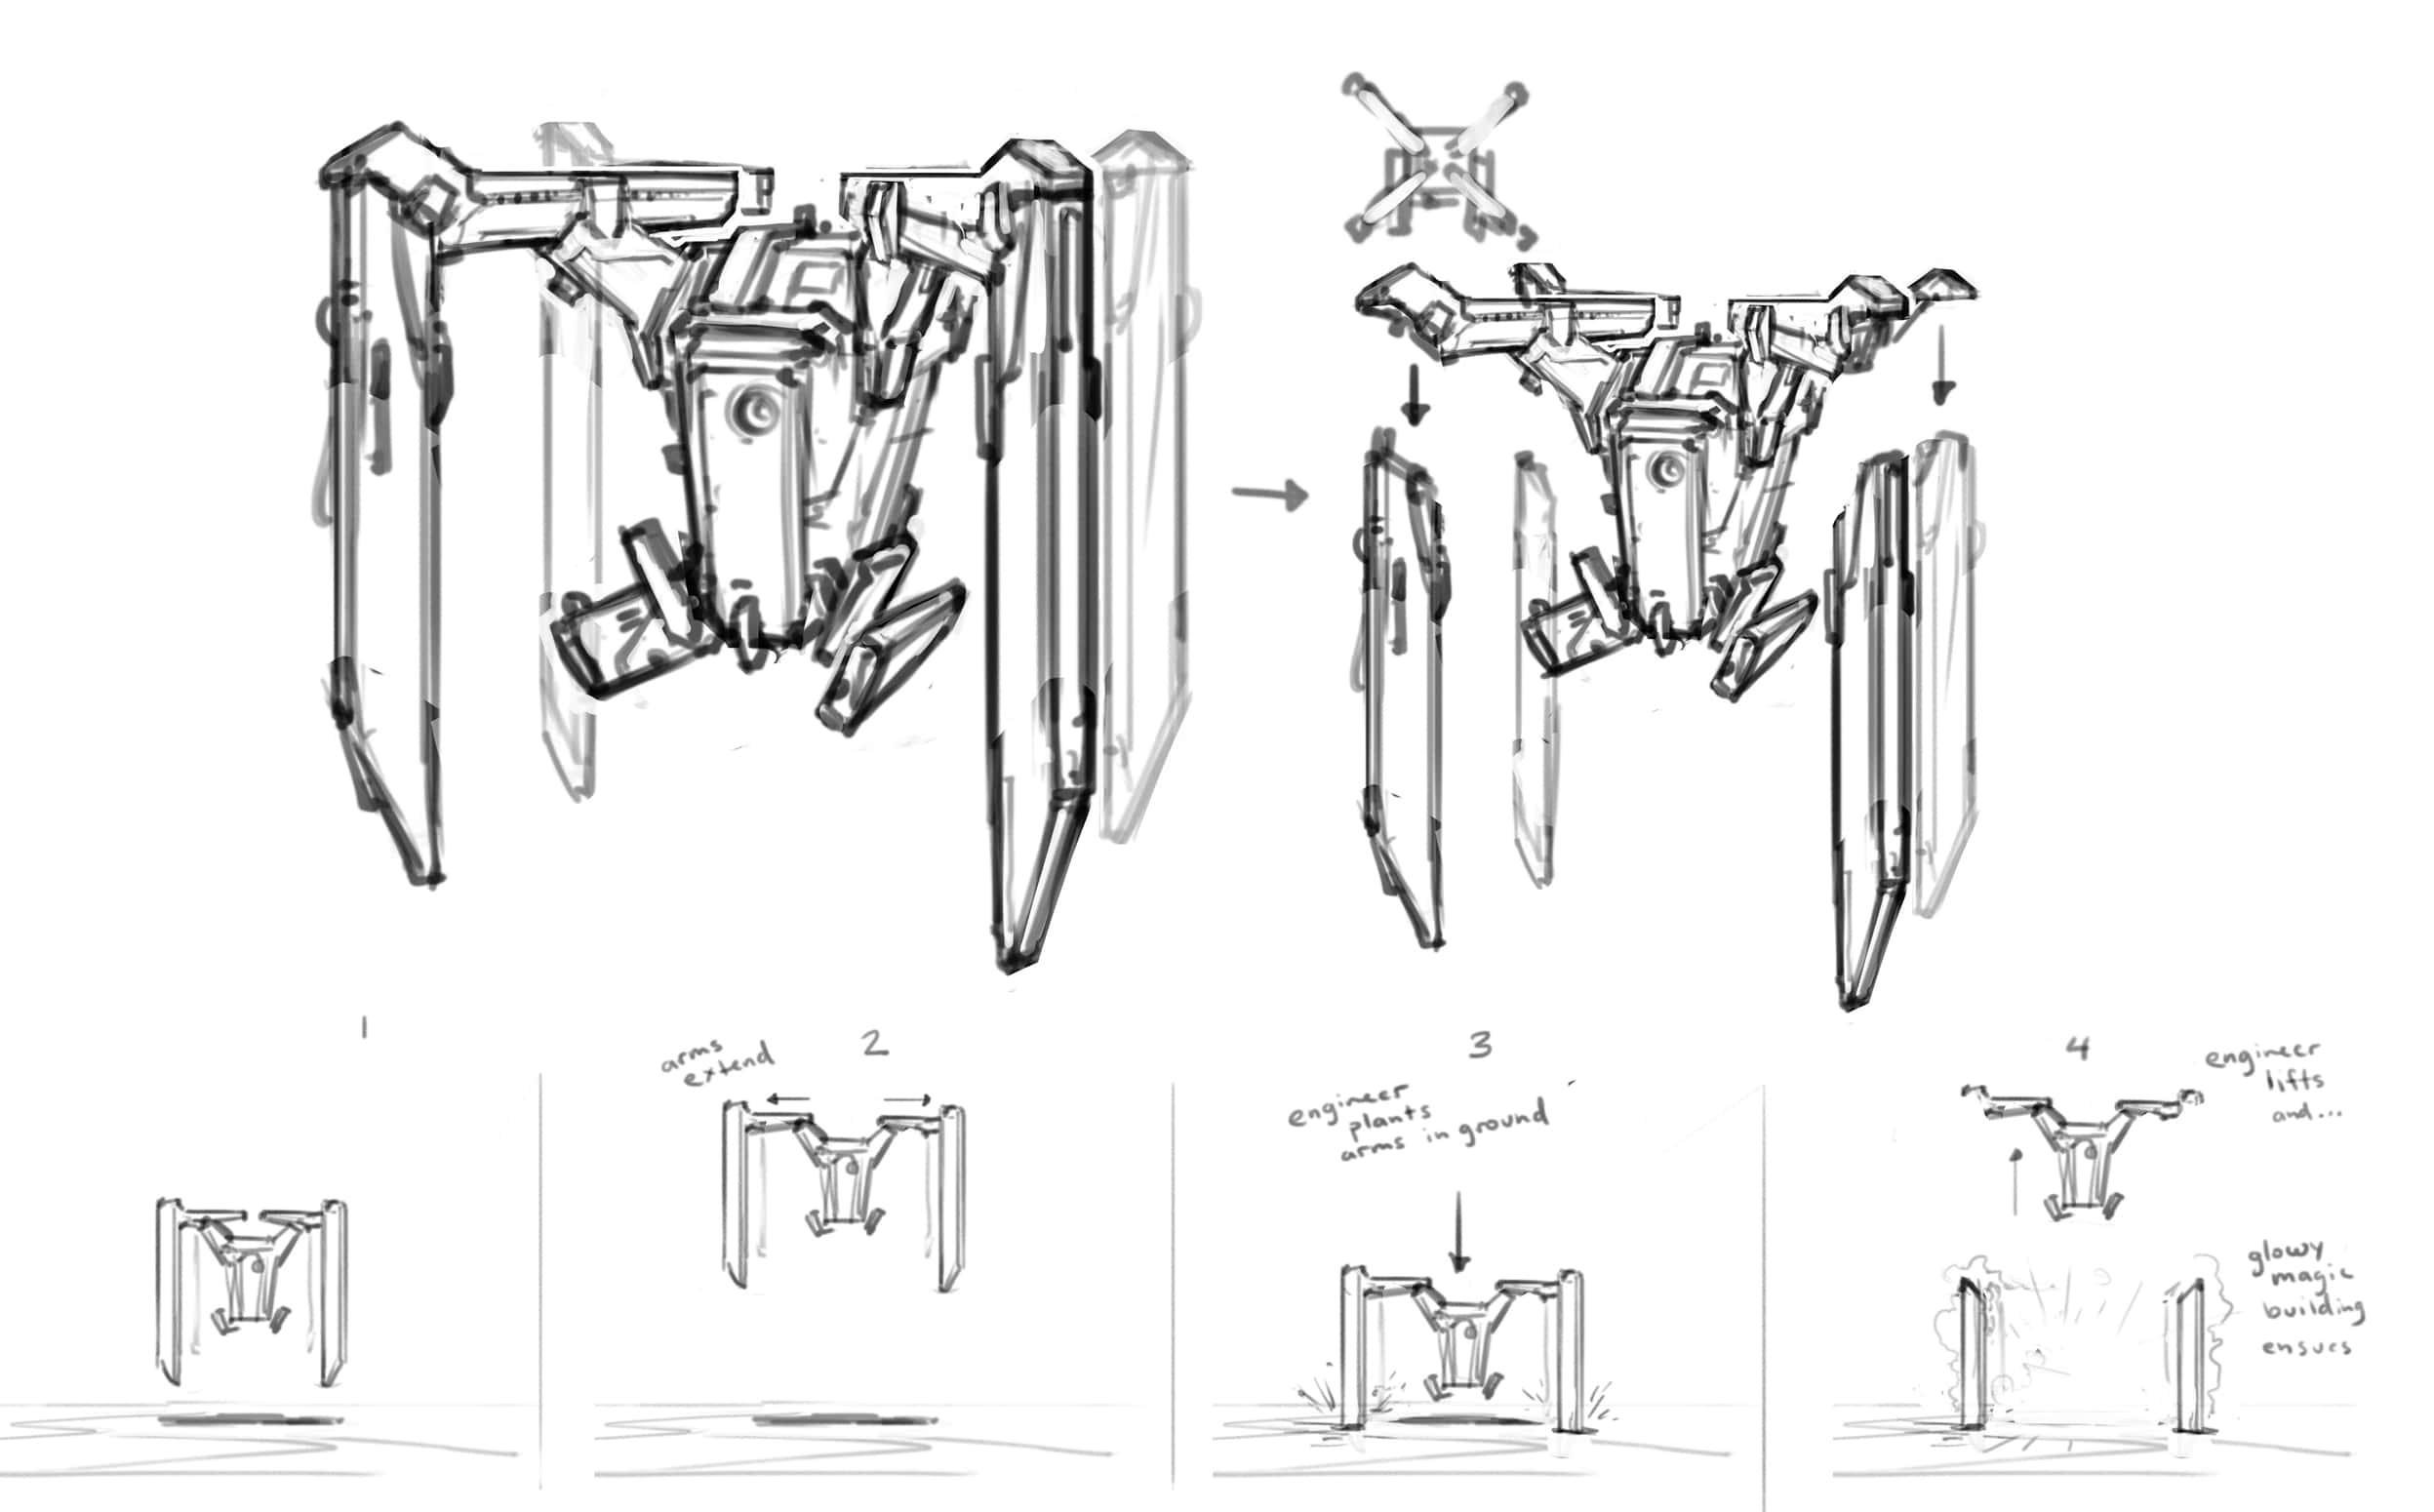 Another early Engineer designed use by some Post-Humans was the EG-695 which upon construction which rocketed from the Nexus to the Turinium generator and then plant the data-combs located in its Arms on the ground and then lift off to return to the Nexus to receive additional data-combs.